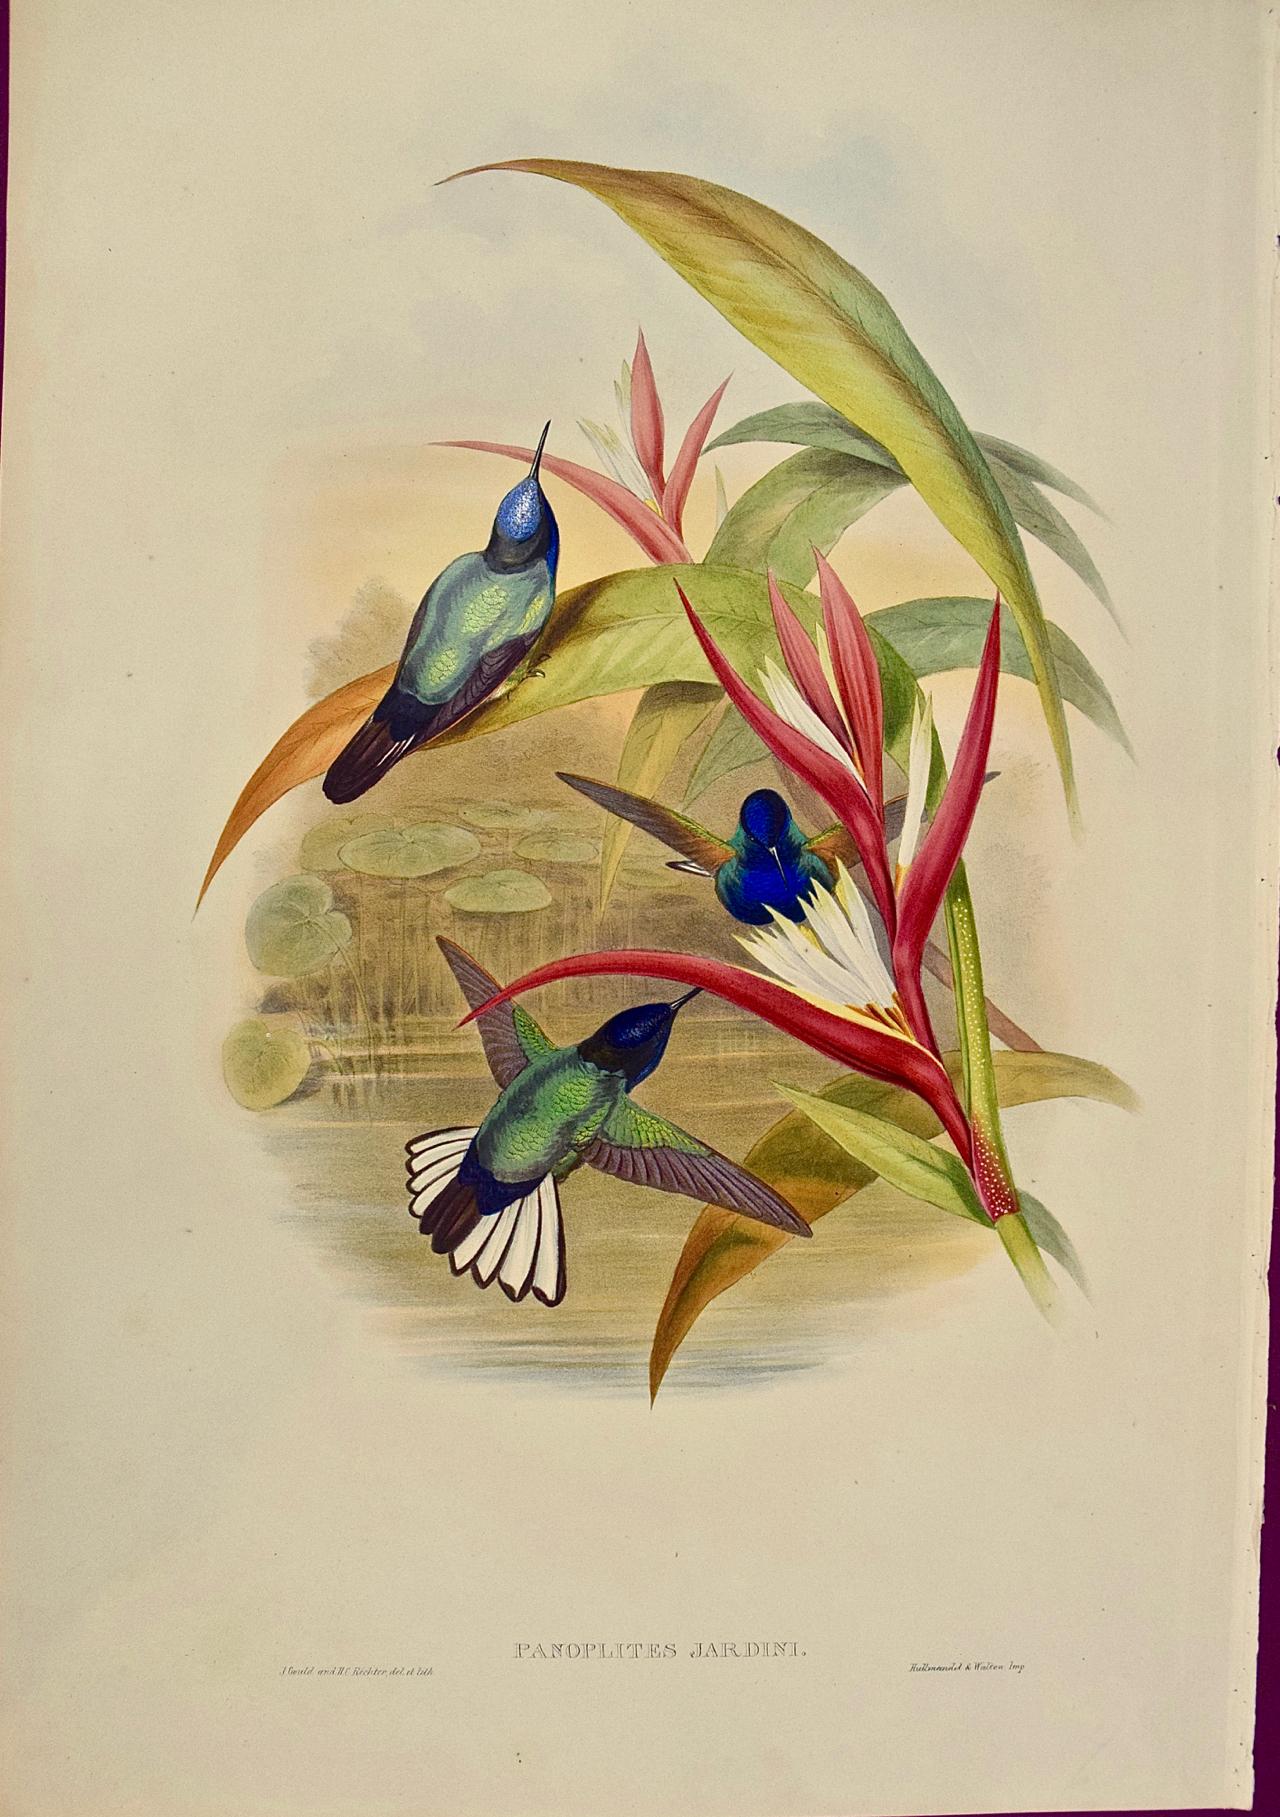 John Gould and Henry Constantine Richter Animal Print - Hummingbirds: Framed 19th Century Gould Hand-Colored "Panoplites" by Gould